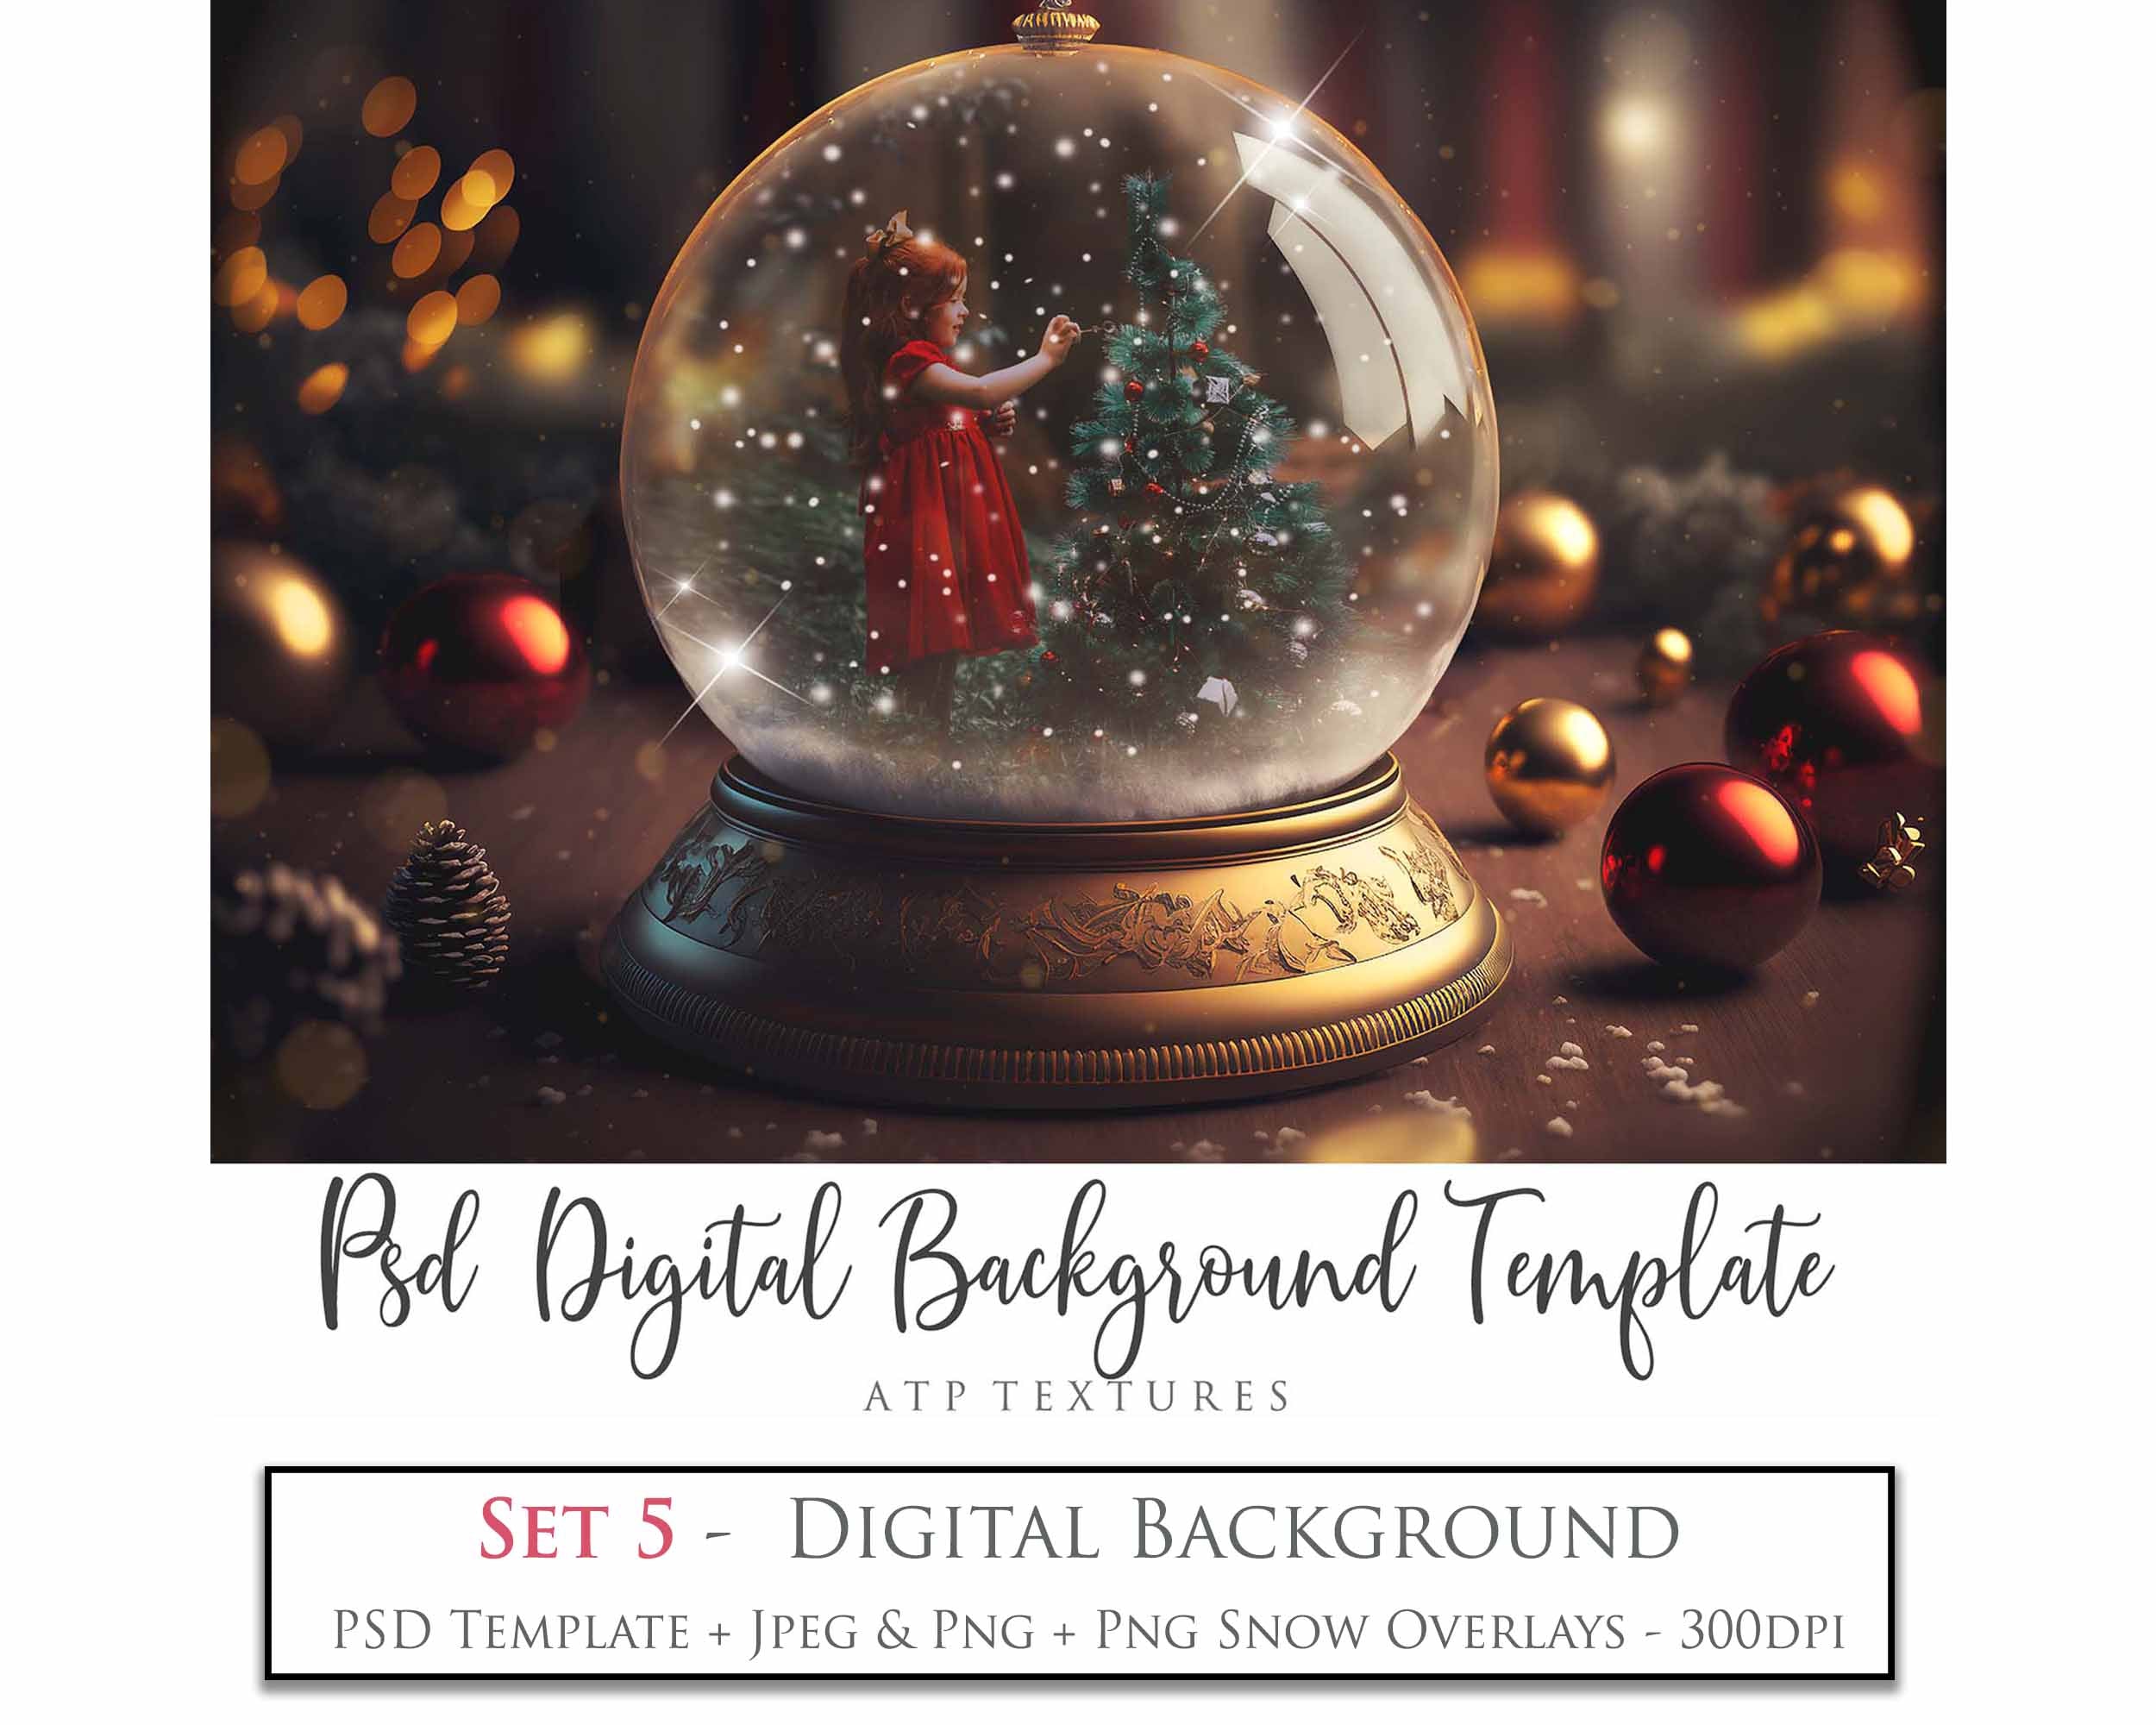 Digital Snow Globe Background, with snow Overlays and a PSD Template included in the set.The globe is transparent, perfect for you to add your own images and retain the snow globe effect. Printable Card for Christmas with Santa Window or Glass Globe. ATP Textures